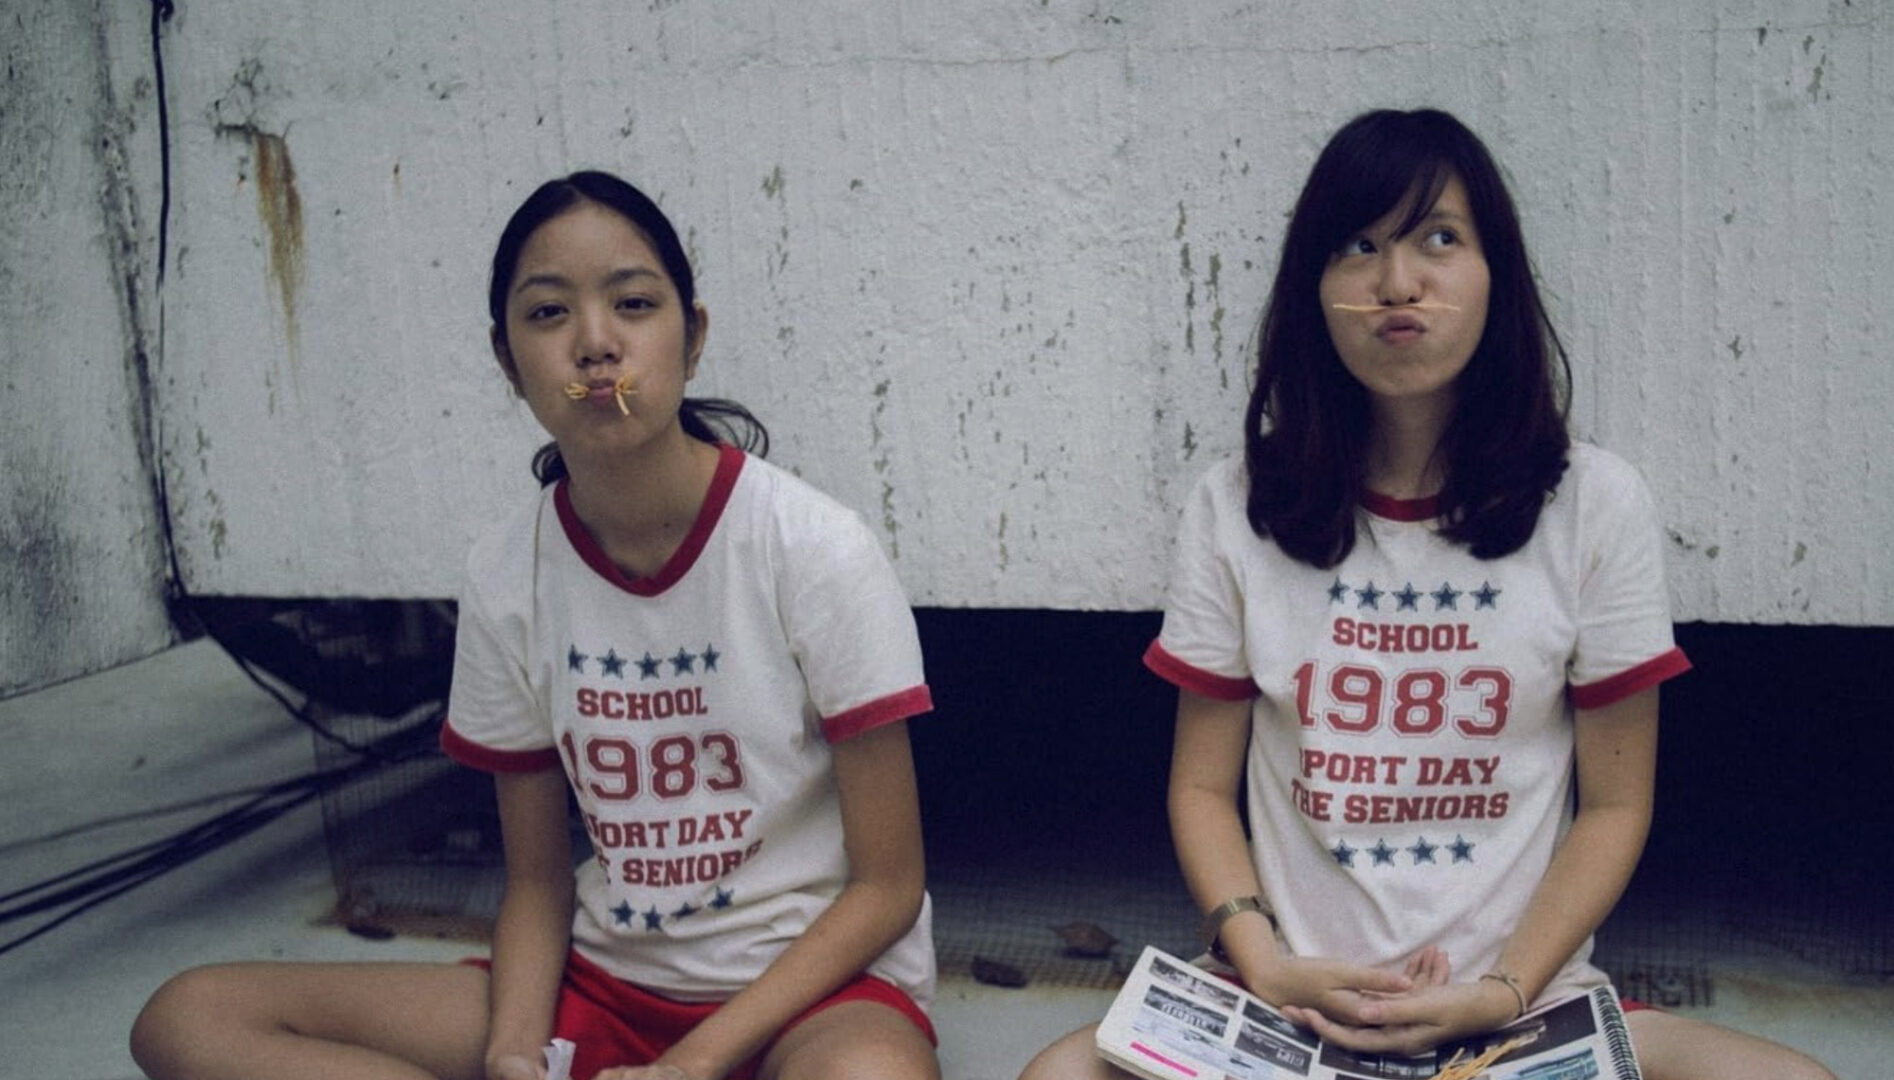 Two young people sitting on a floor, one holding a noodle between their nose and lip, and the other with a mouthful of noodles.